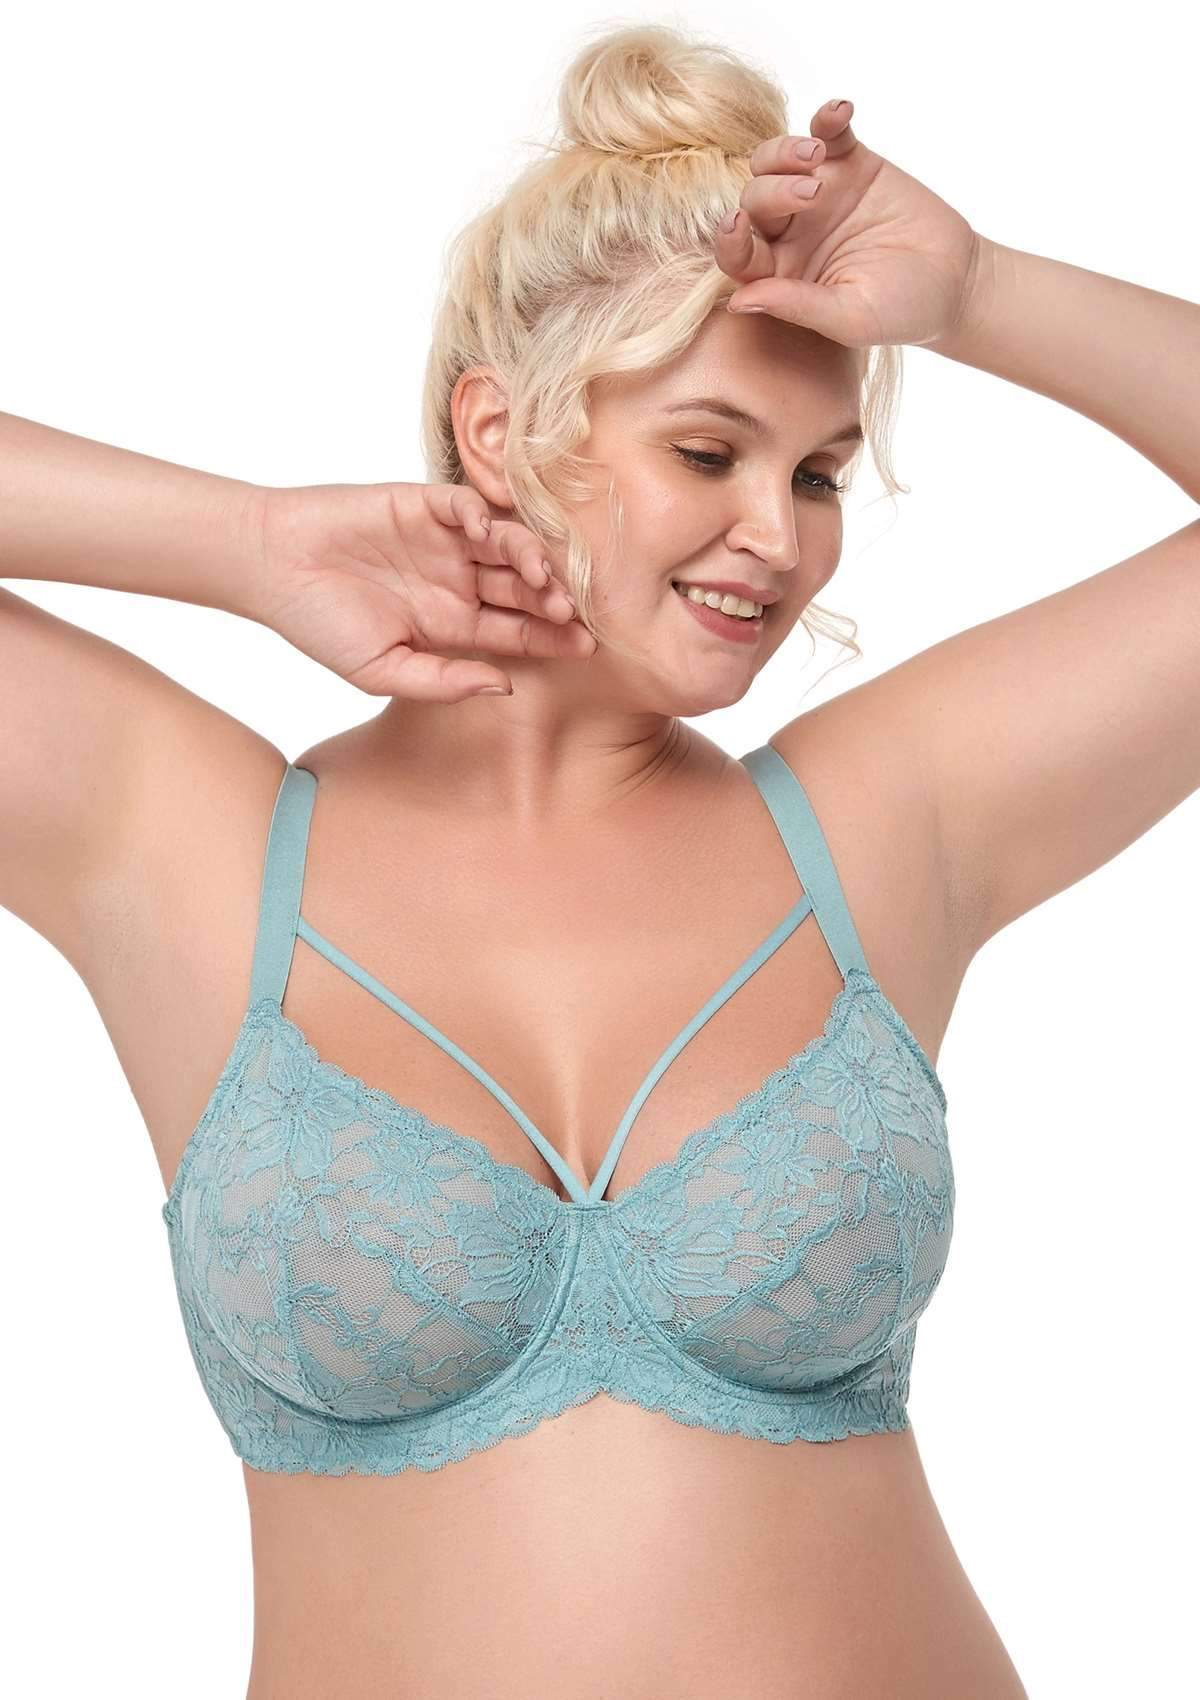 HSIA Pretty In Petals Unlined Lace Bra: Comfortable And Supportive Bra - Crystal Blue / 38 / C